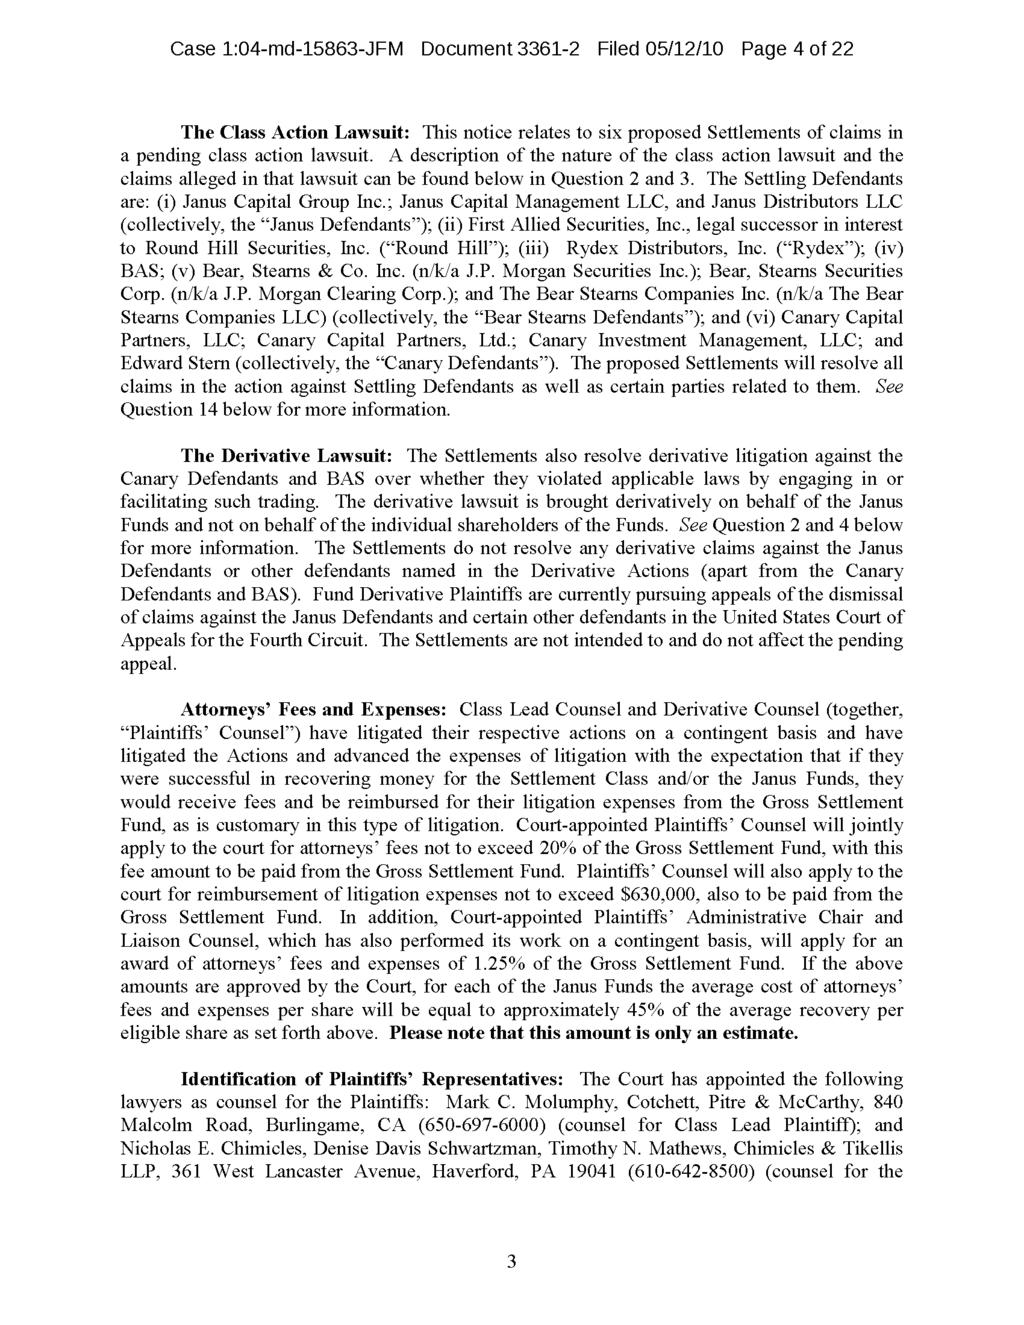 Case 1:04-md-15863-JFM Document 3361-2 Filed 05/12/10 Page 4 of 22 The Class Action Lawsuit: This notice relates to six proposed Settlements of claims in a pending class action lawsuit.